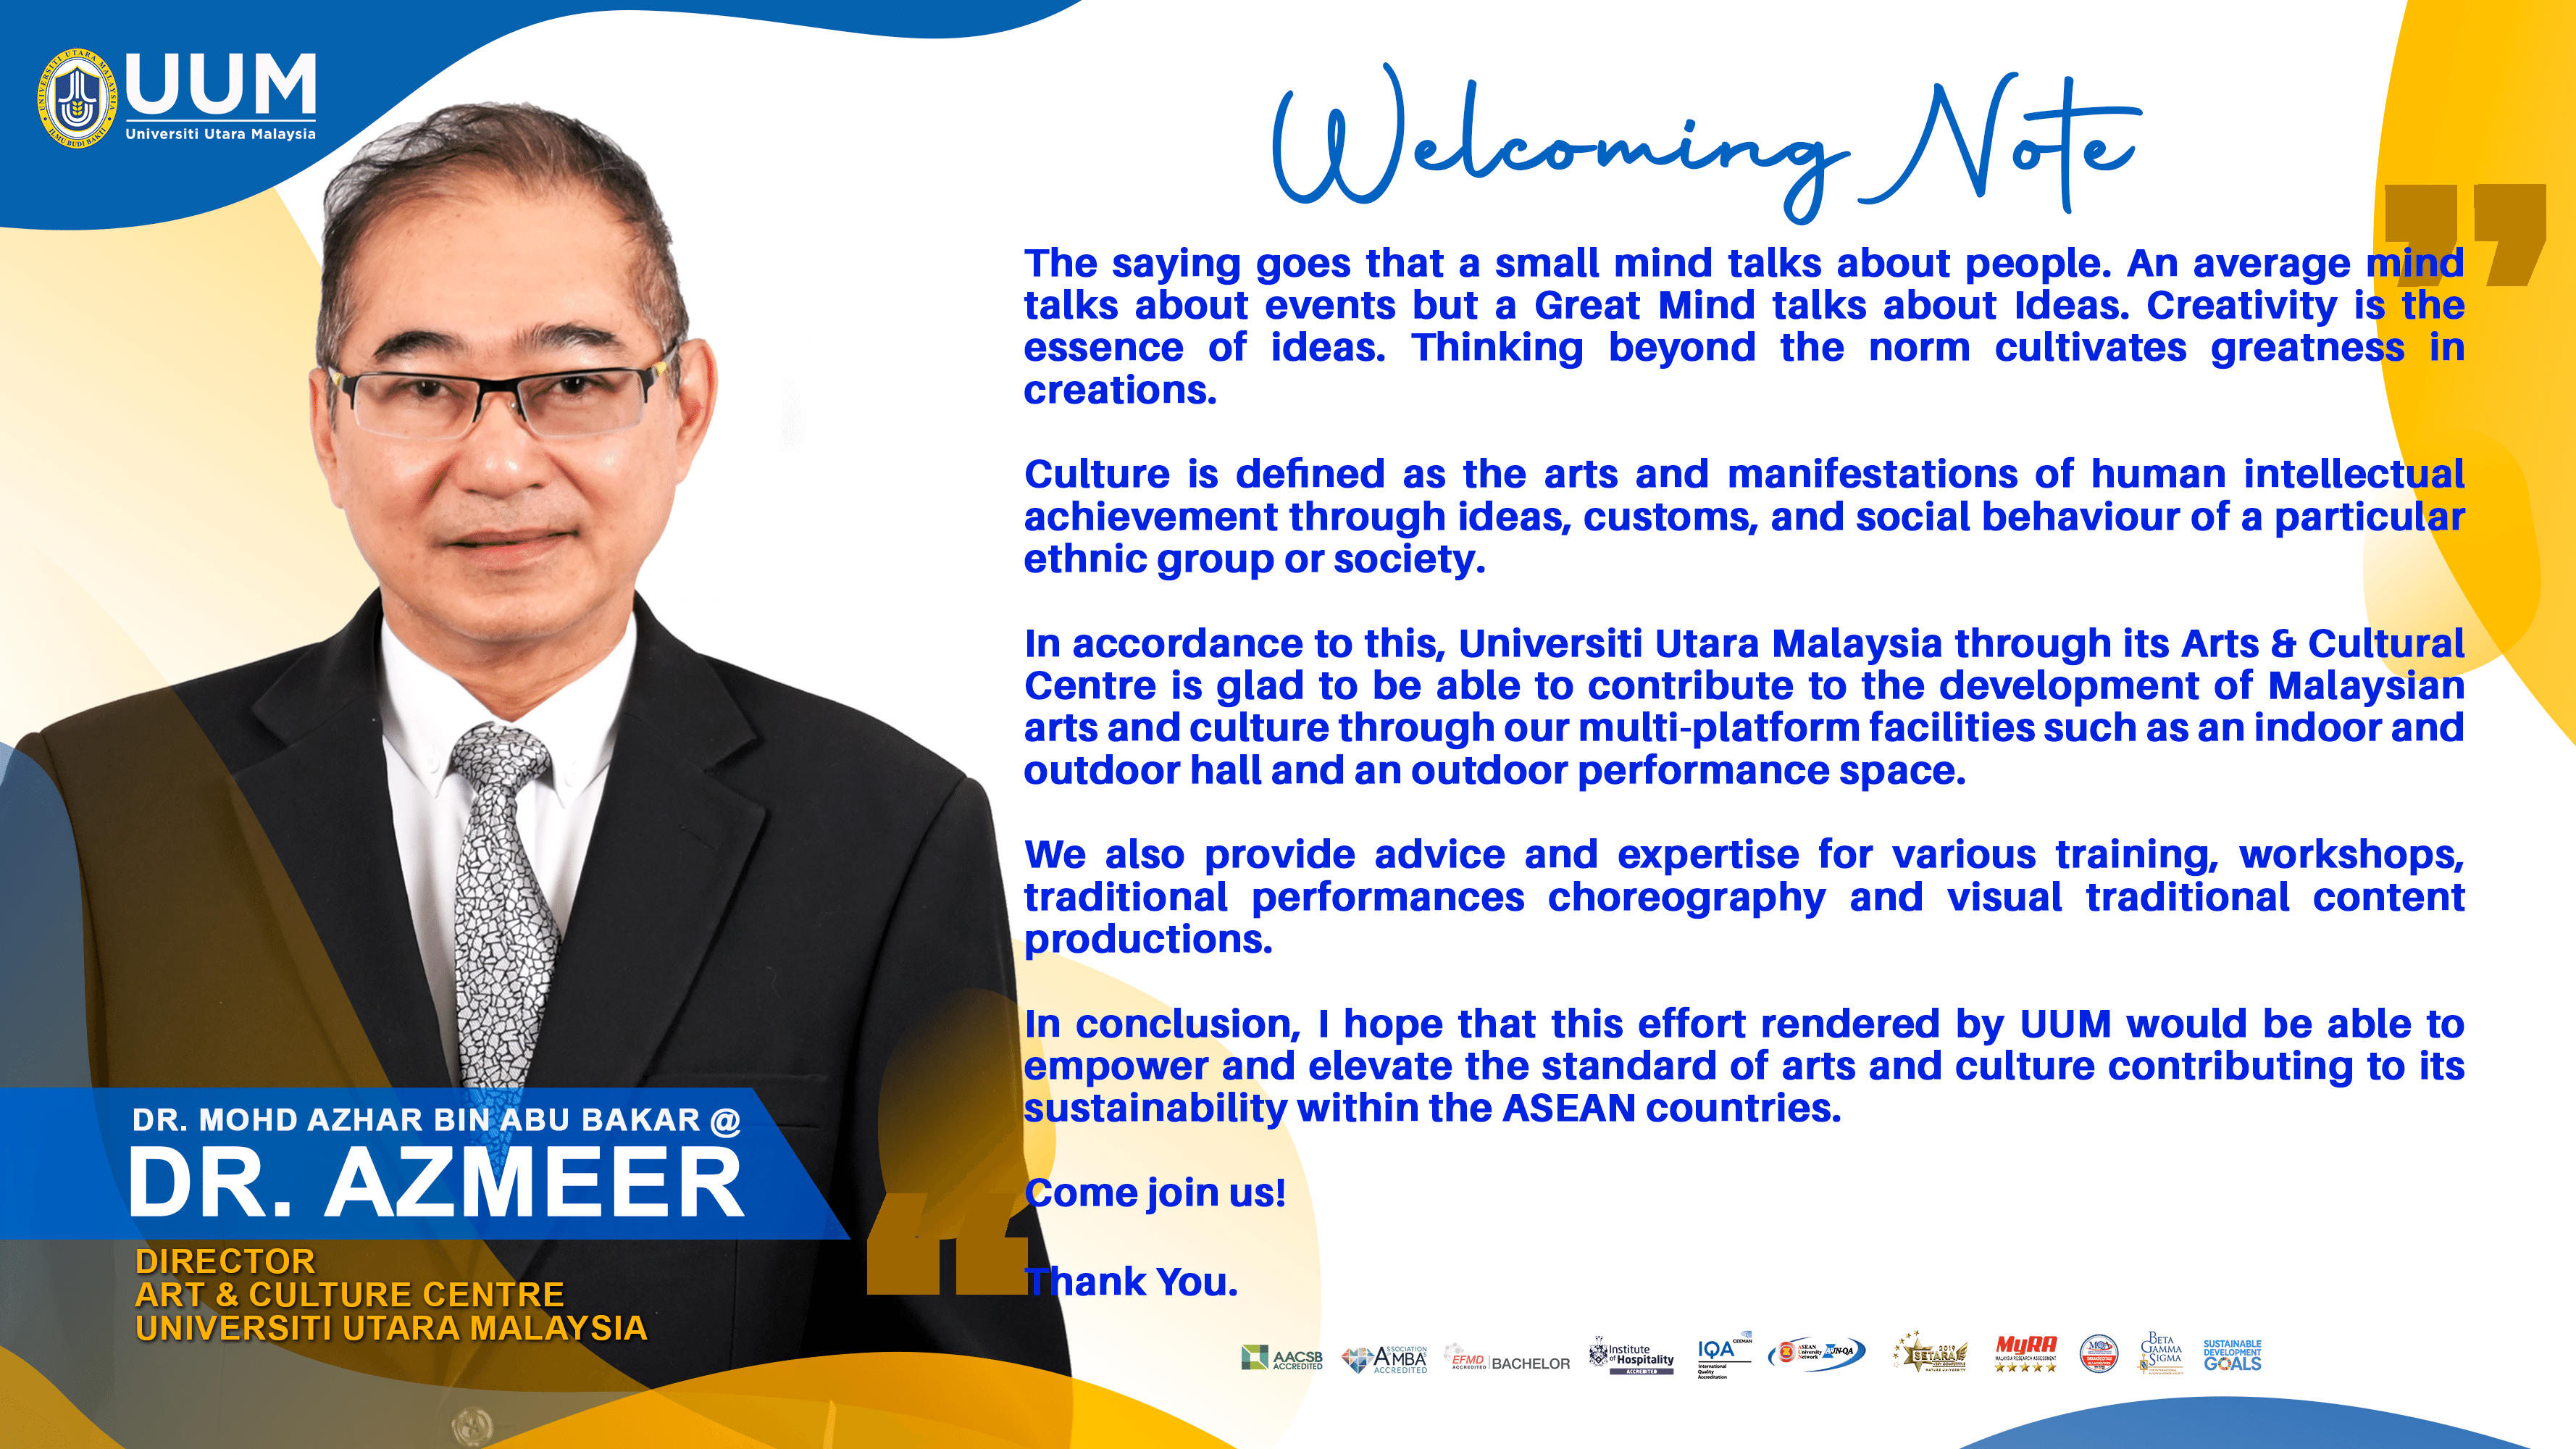 welcomin-note-2.png